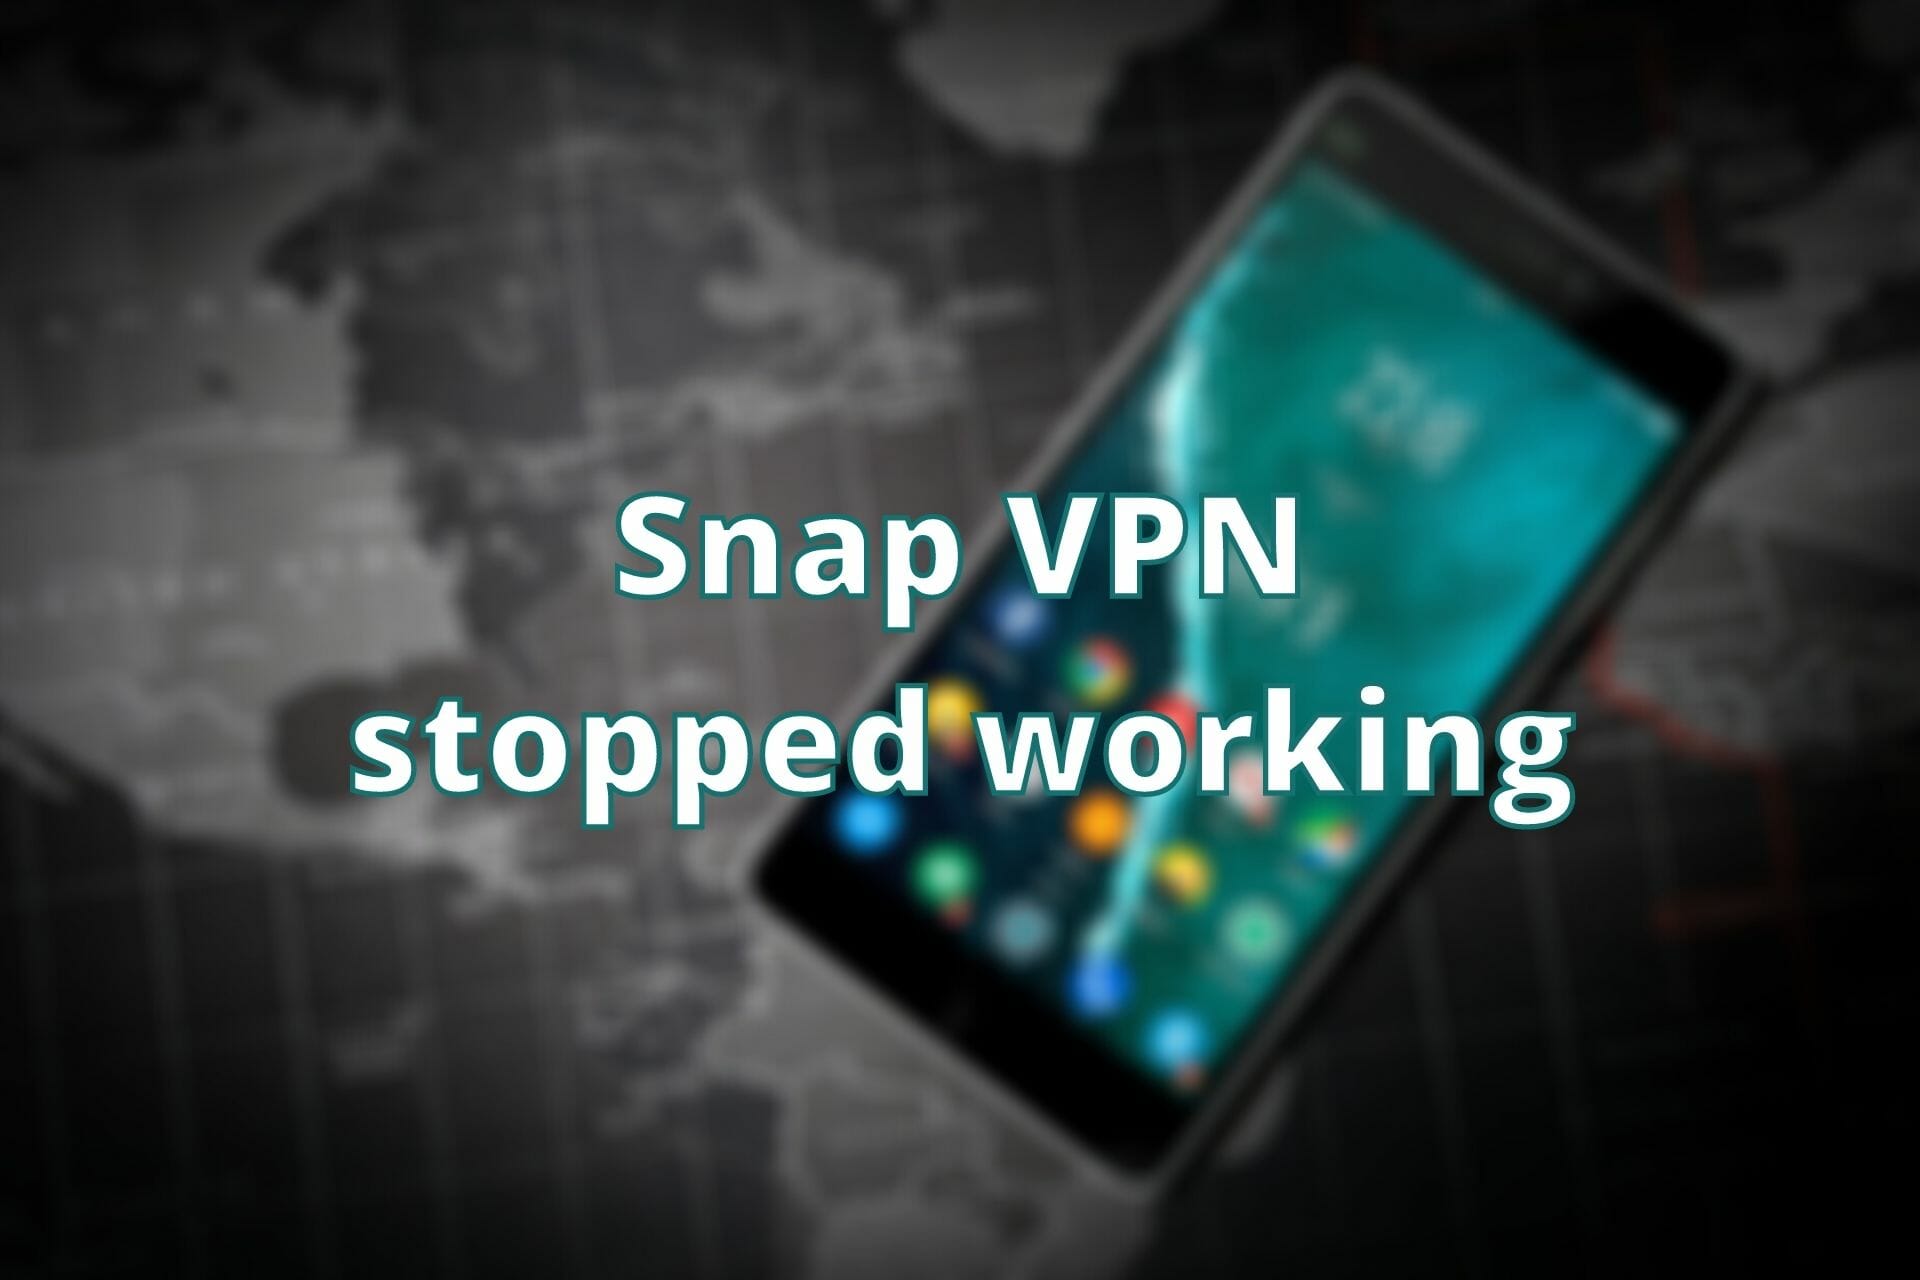 Snap VPN stopped working